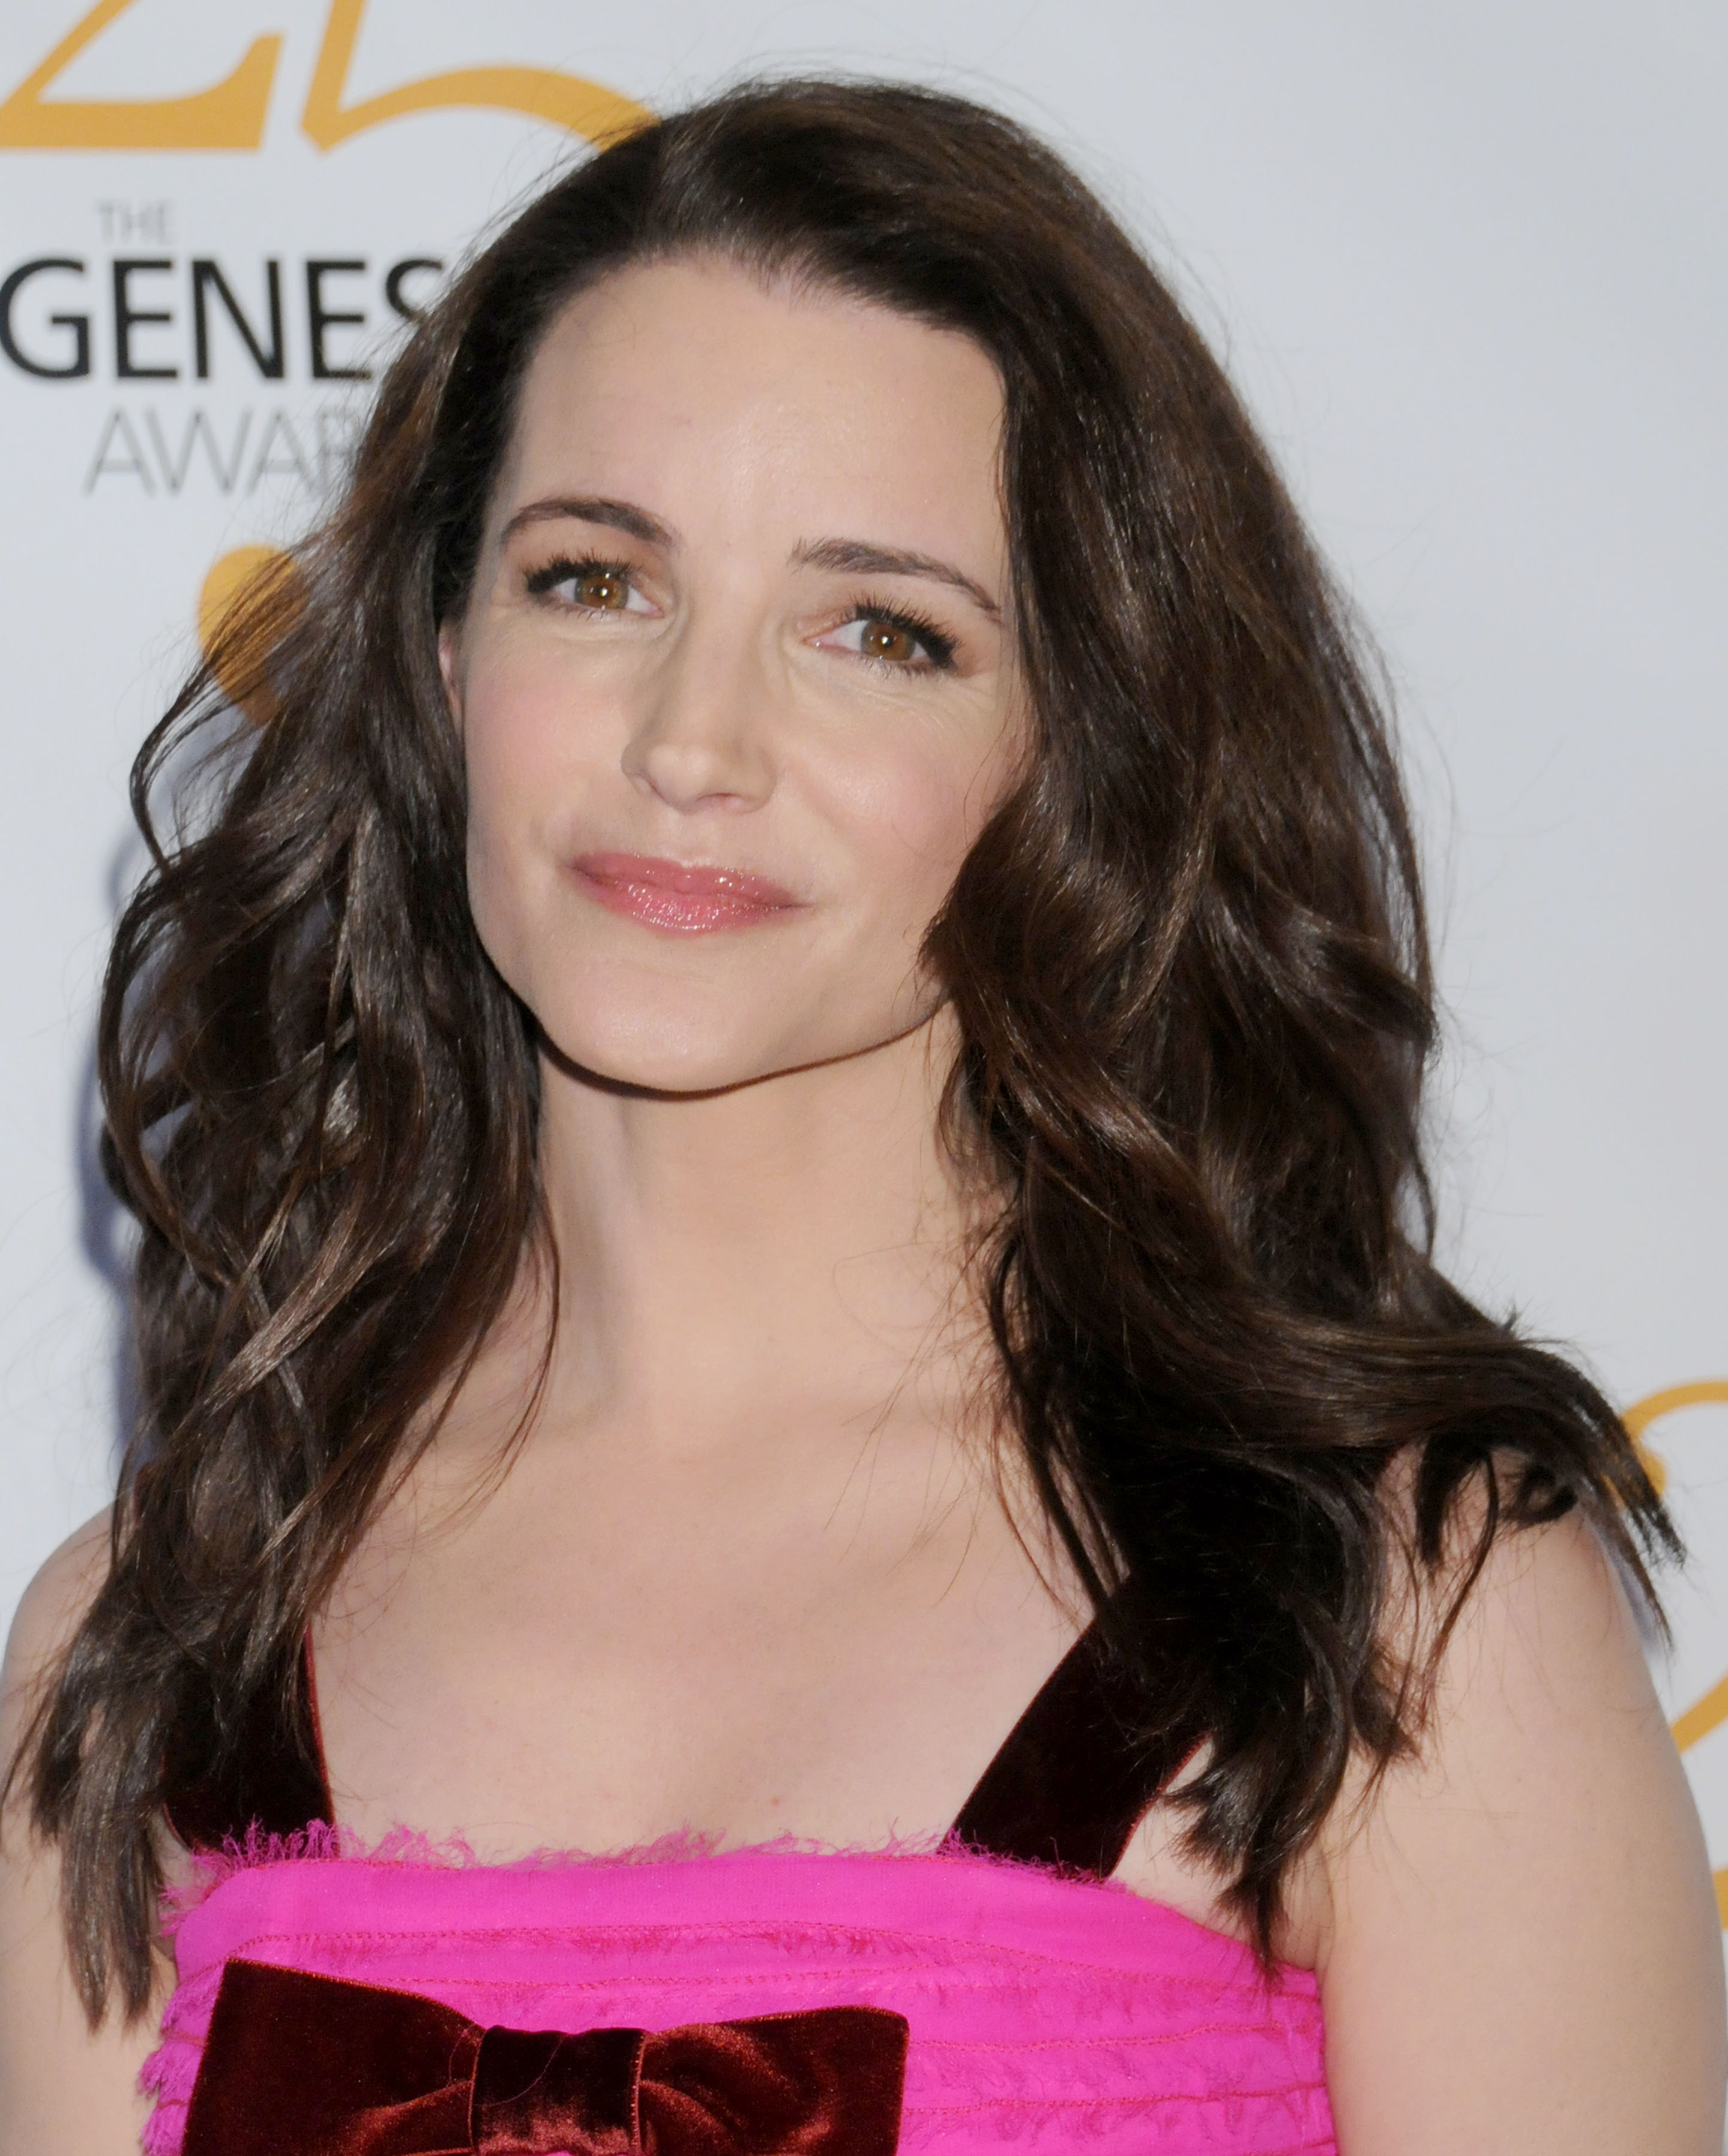 Kristin Davis at the 25th Anniversary Genesis Awards on March 19, 2011 in Century City, California. | Source: Getty Images